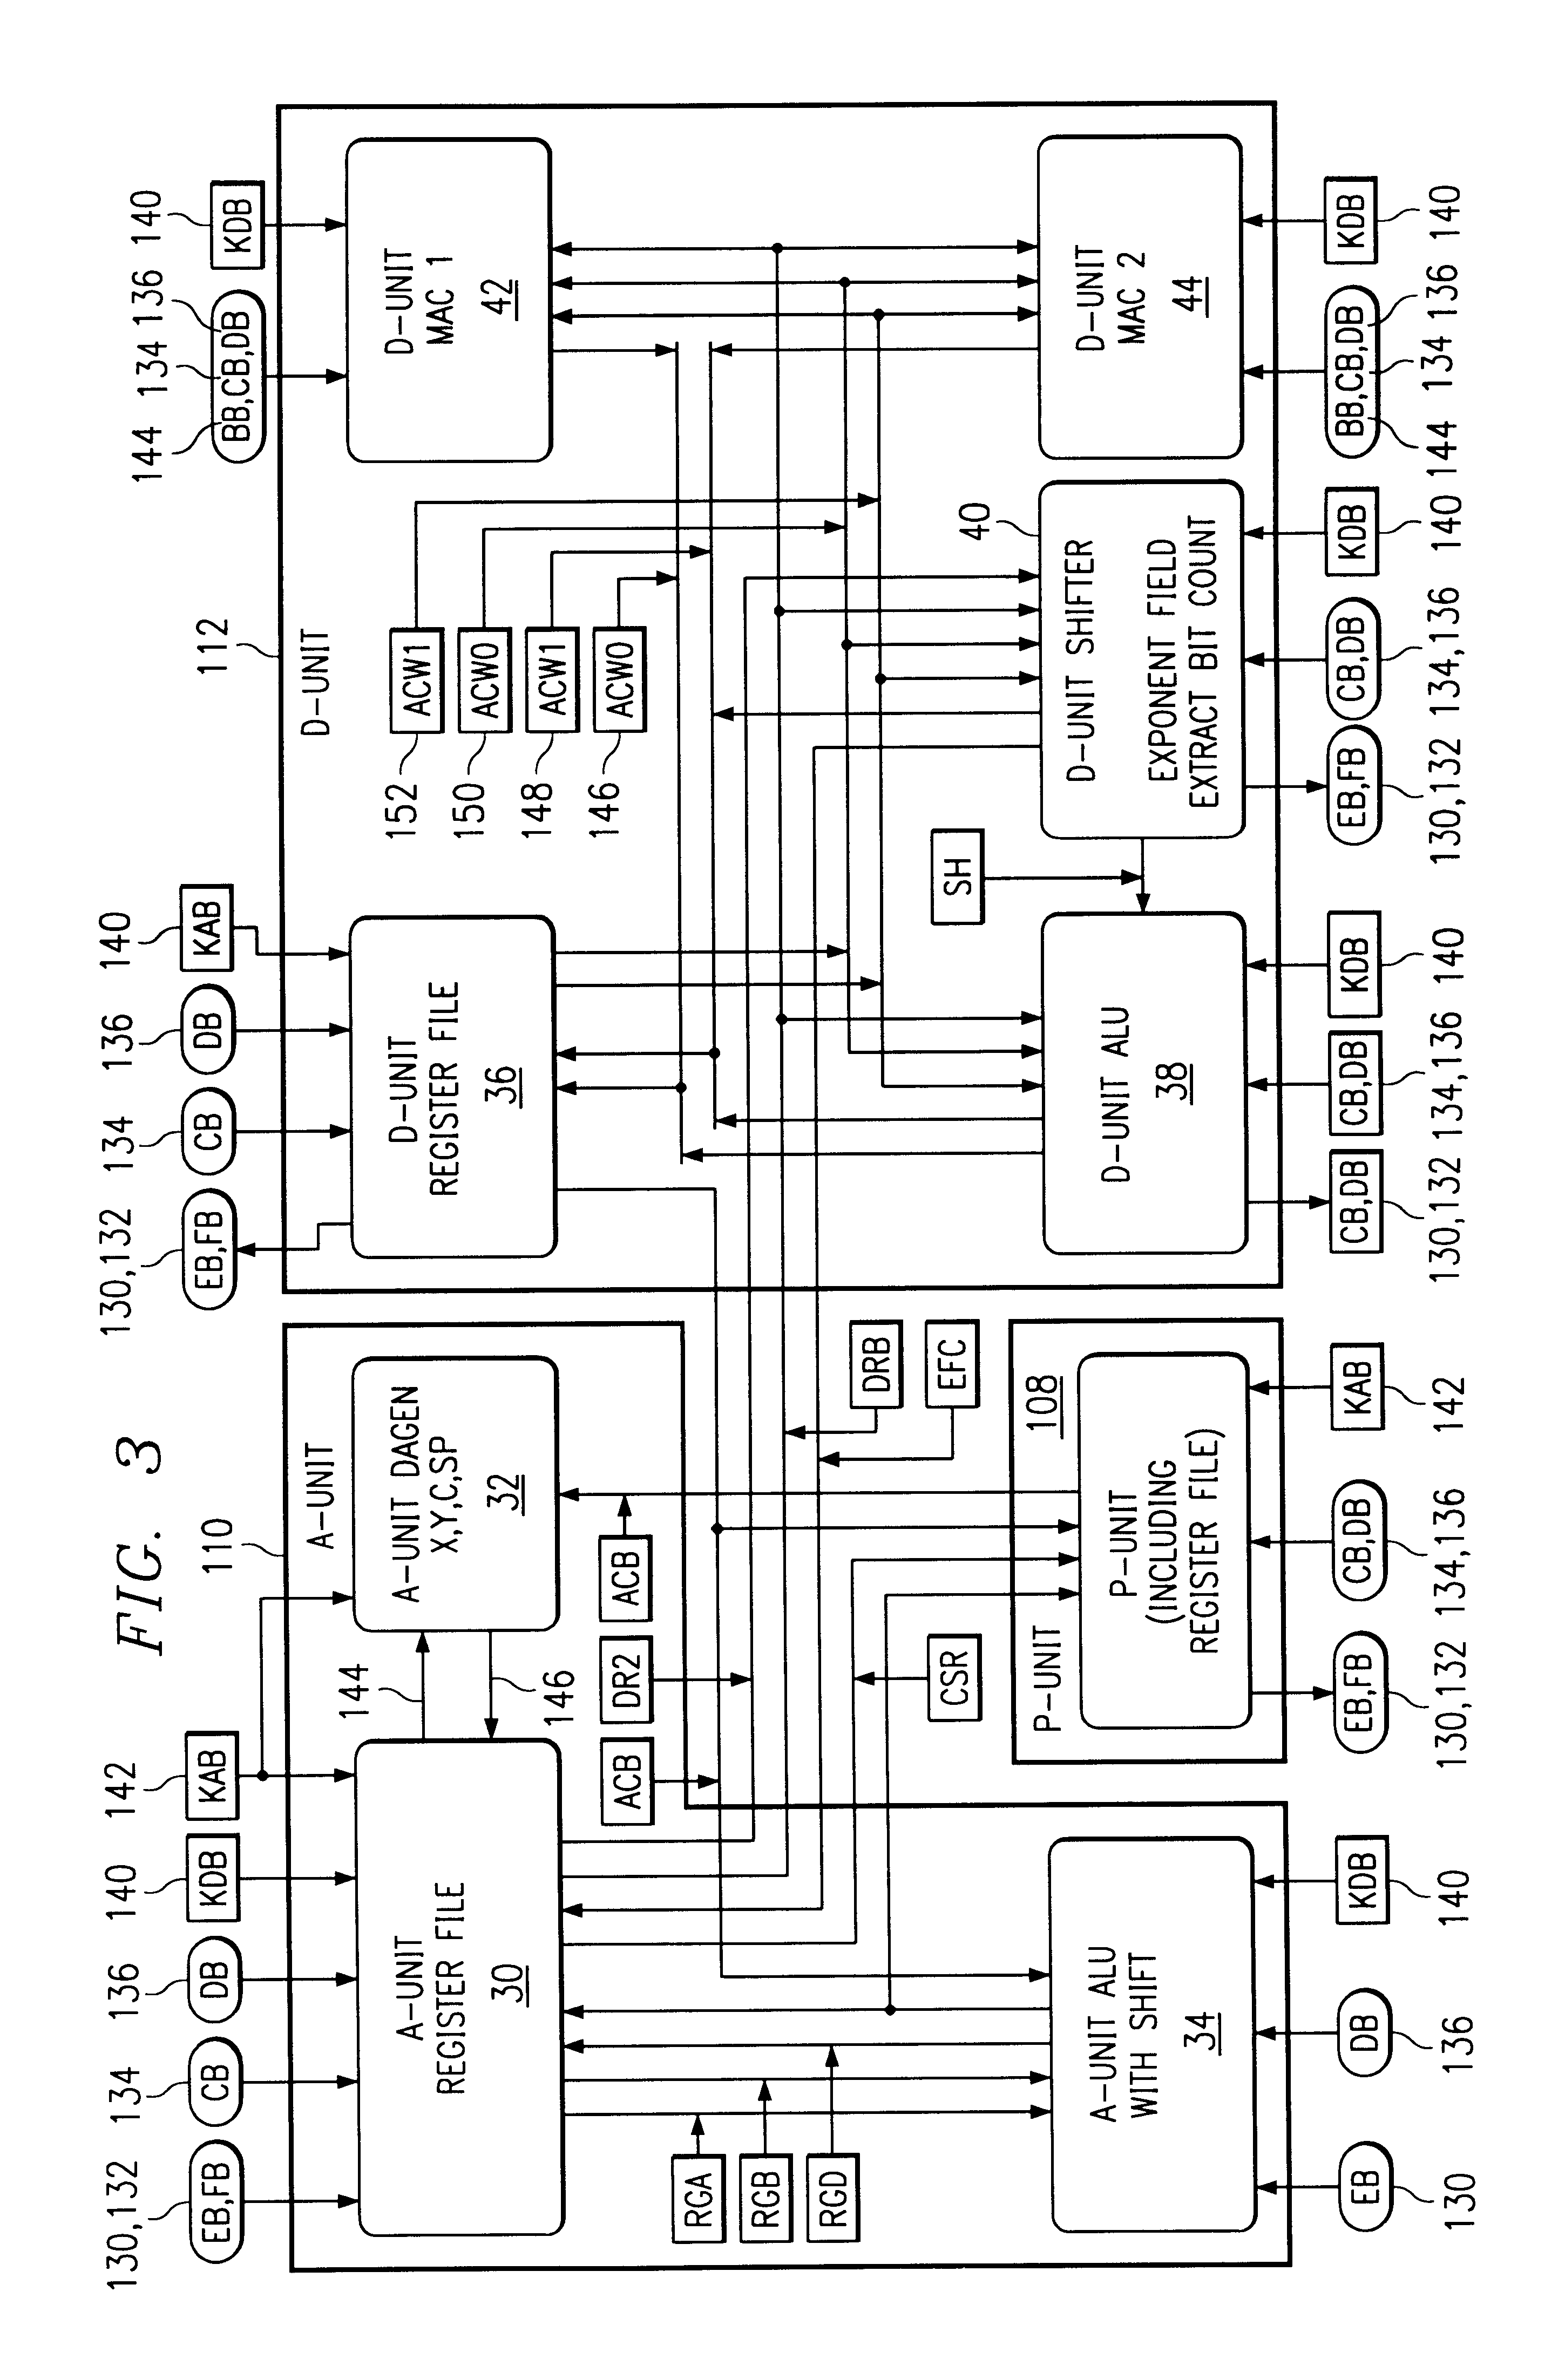 Dual access instruction and compound memory access instruction with compatible address fields